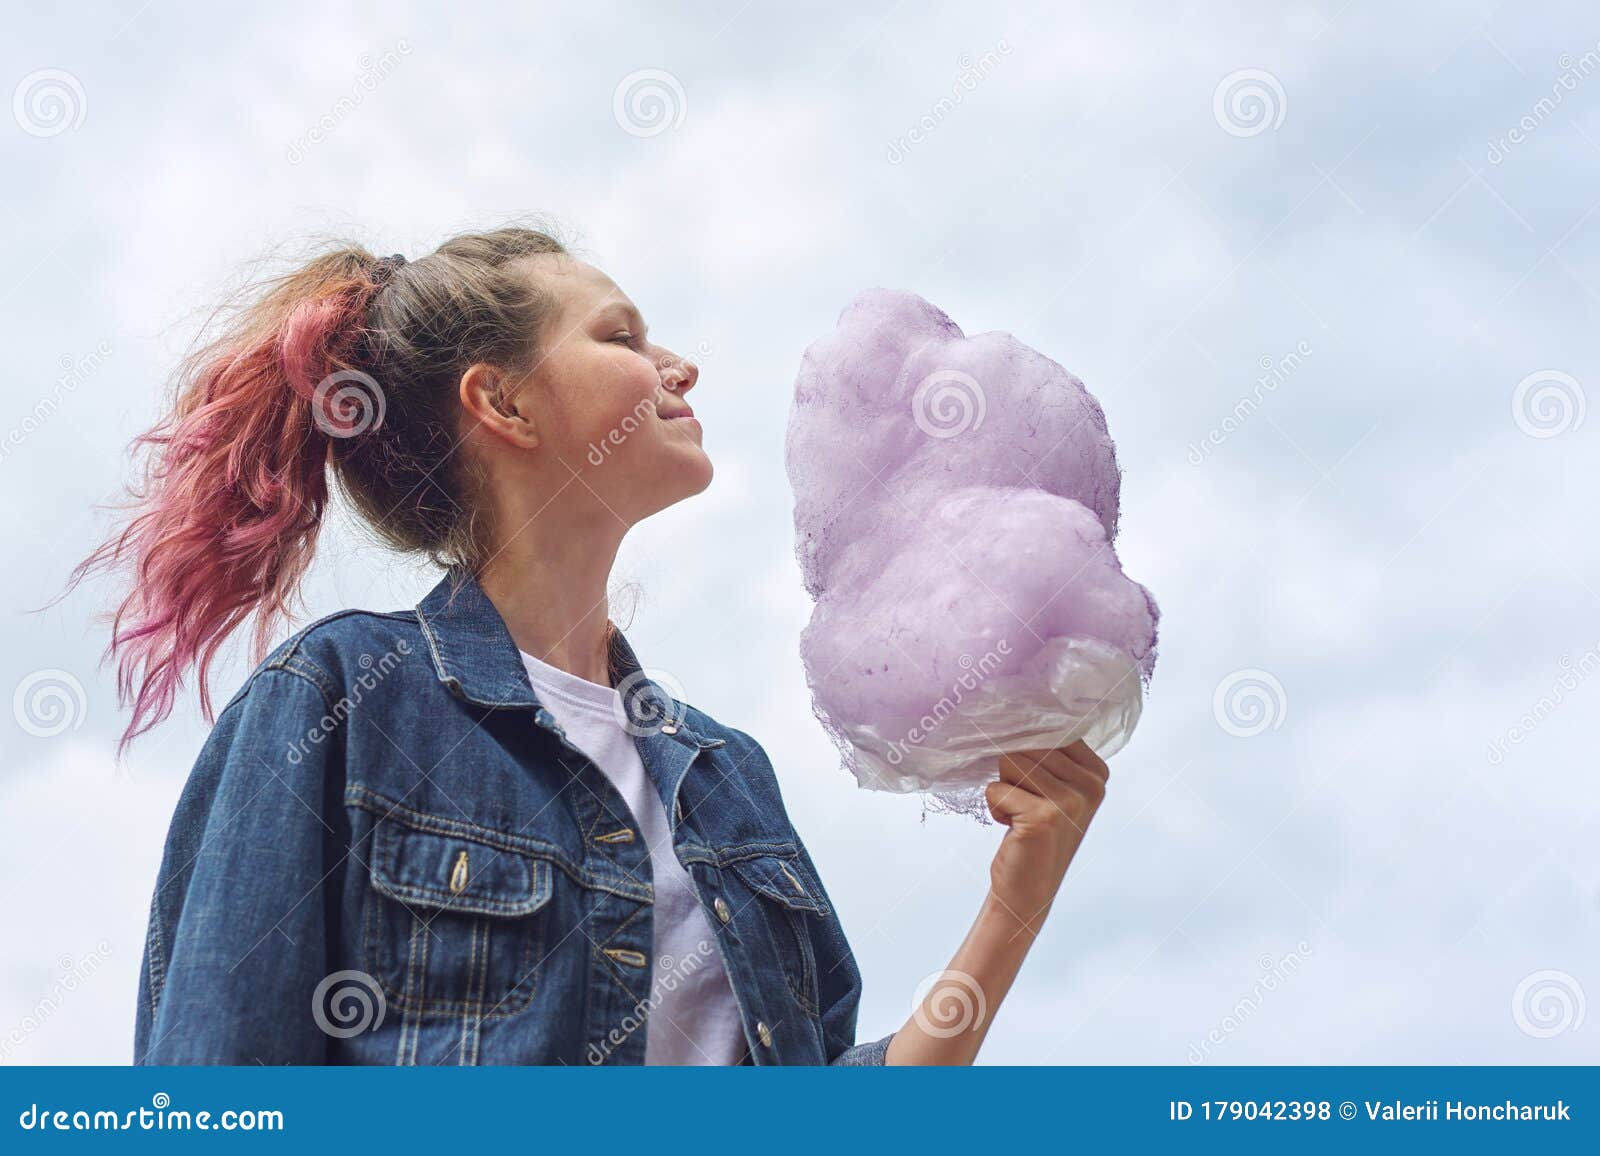 Beautiful Smiling Teenage Girl with Pink Hair, Hairstyle Holding Candy  Floss Stock Photo - Image of park, person: 179042398